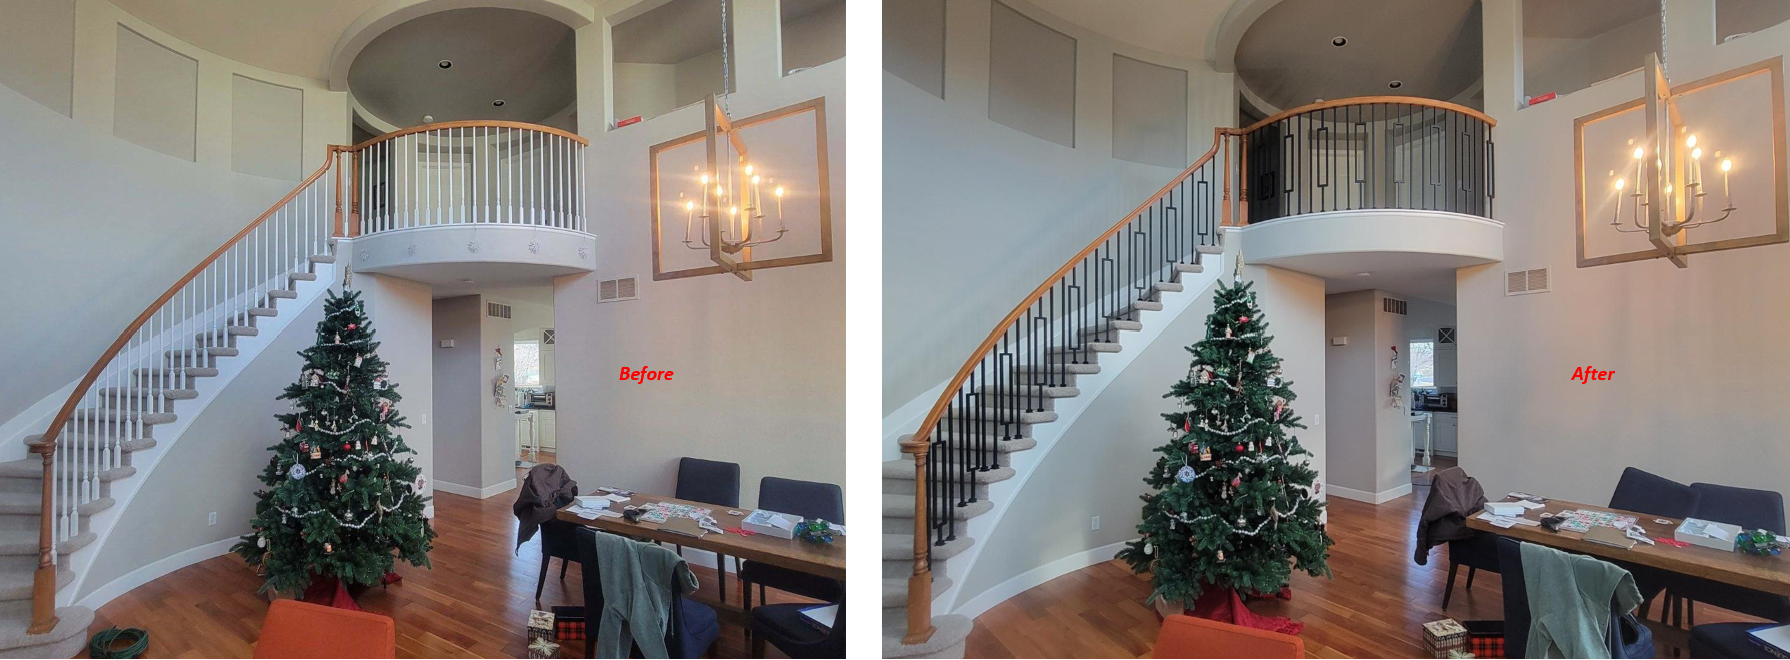 Baluster-Before-and-After